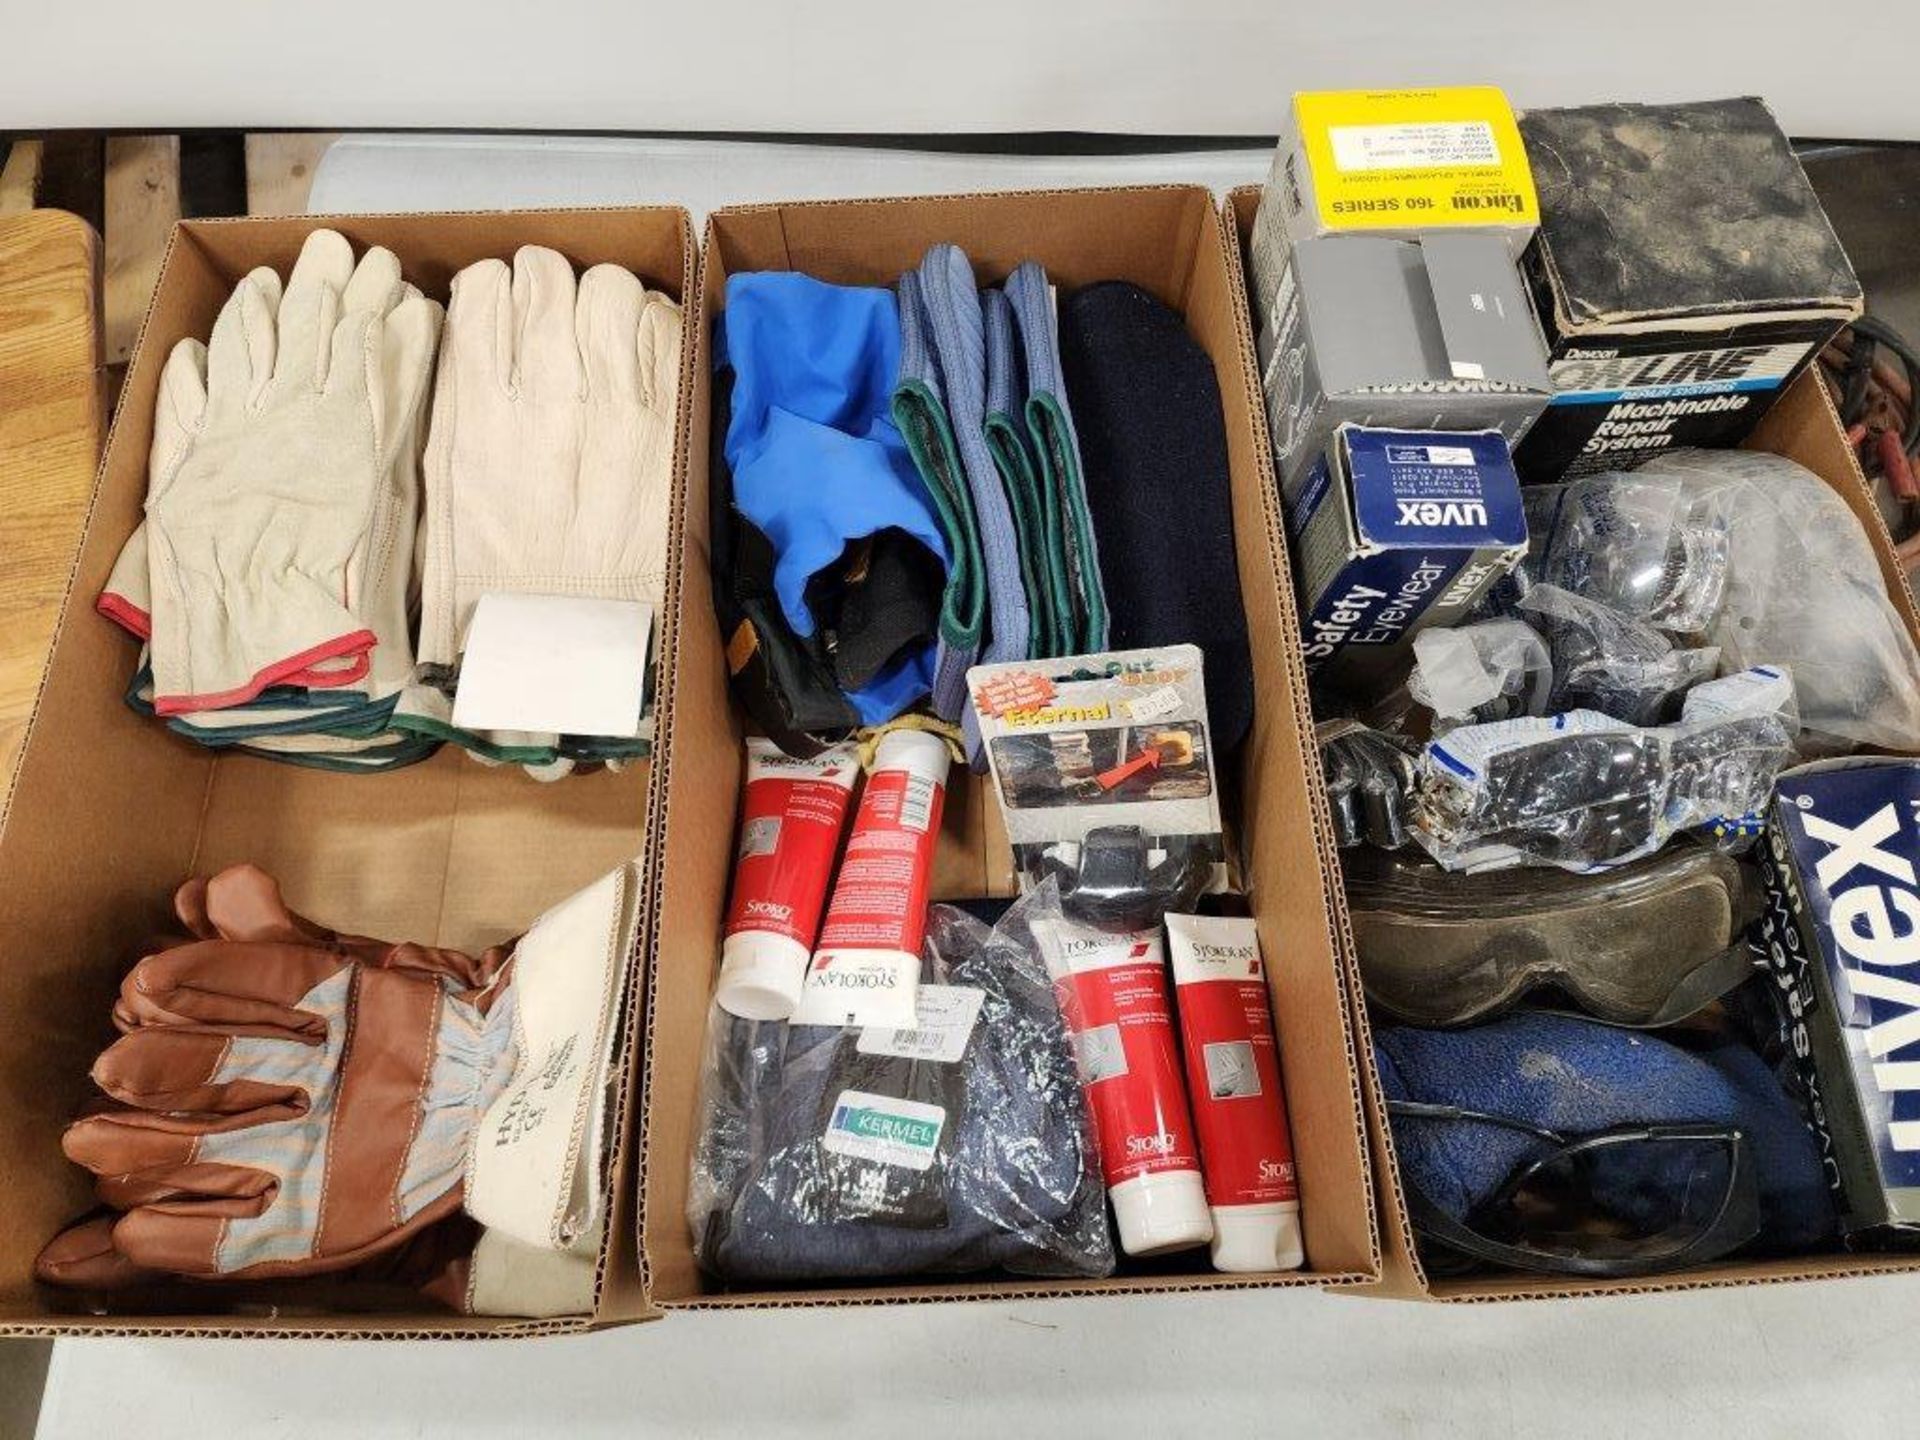 L/O ASSORTED GLOVES, SAFETY GLASSES, BOOT LINERS, WINTER GEAR, ETC.